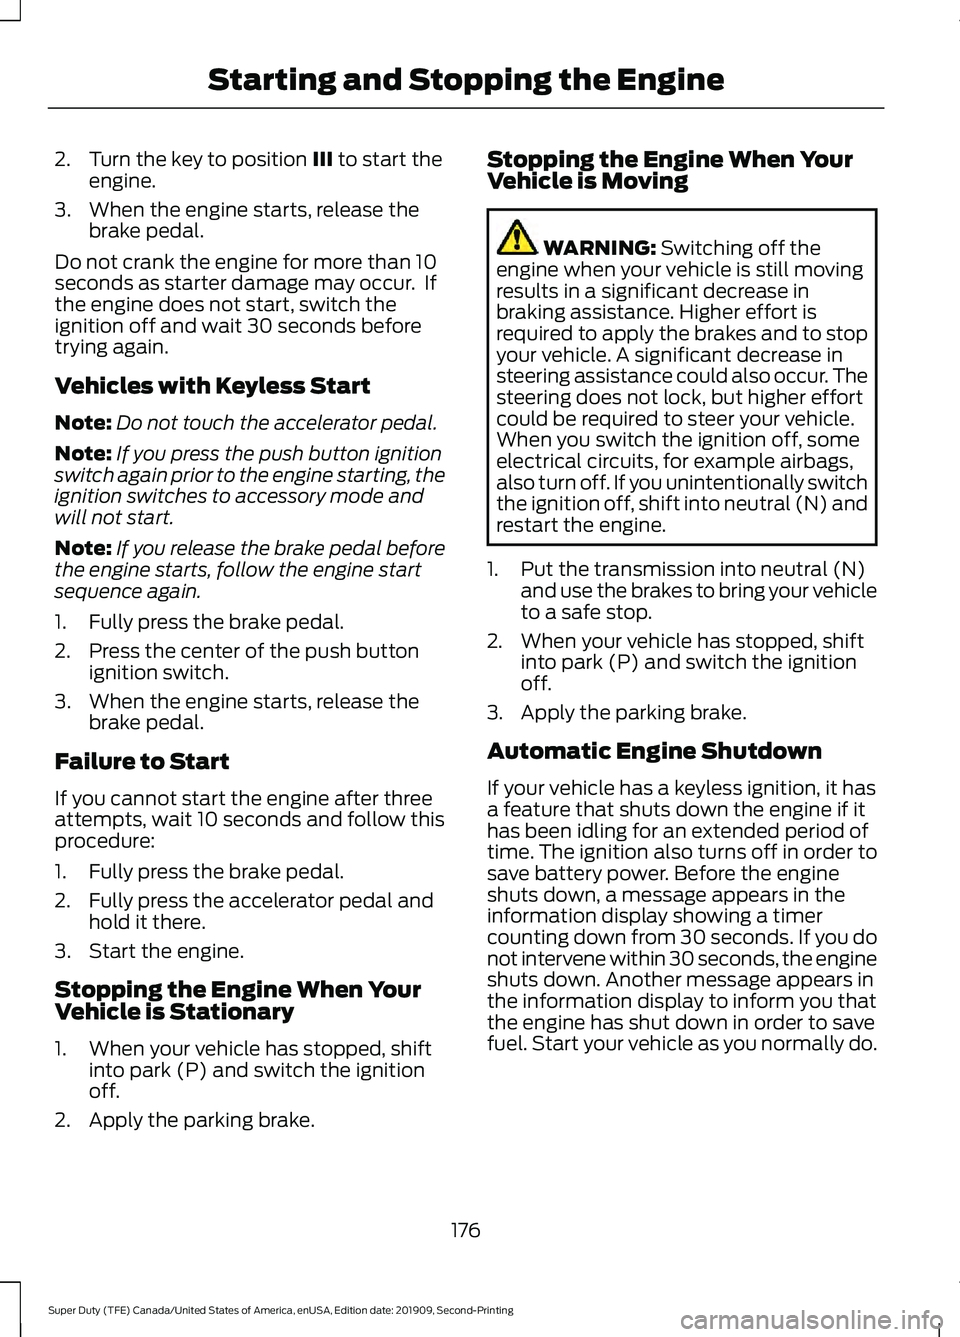 FORD F250 SUPER DUTY 2020  Owners Manual 2. Turn the key to position III to start the
engine.
3. When the engine starts, release the brake pedal.
Do not crank the engine for more than 10
seconds as starter damage may occur.  If
the engine do